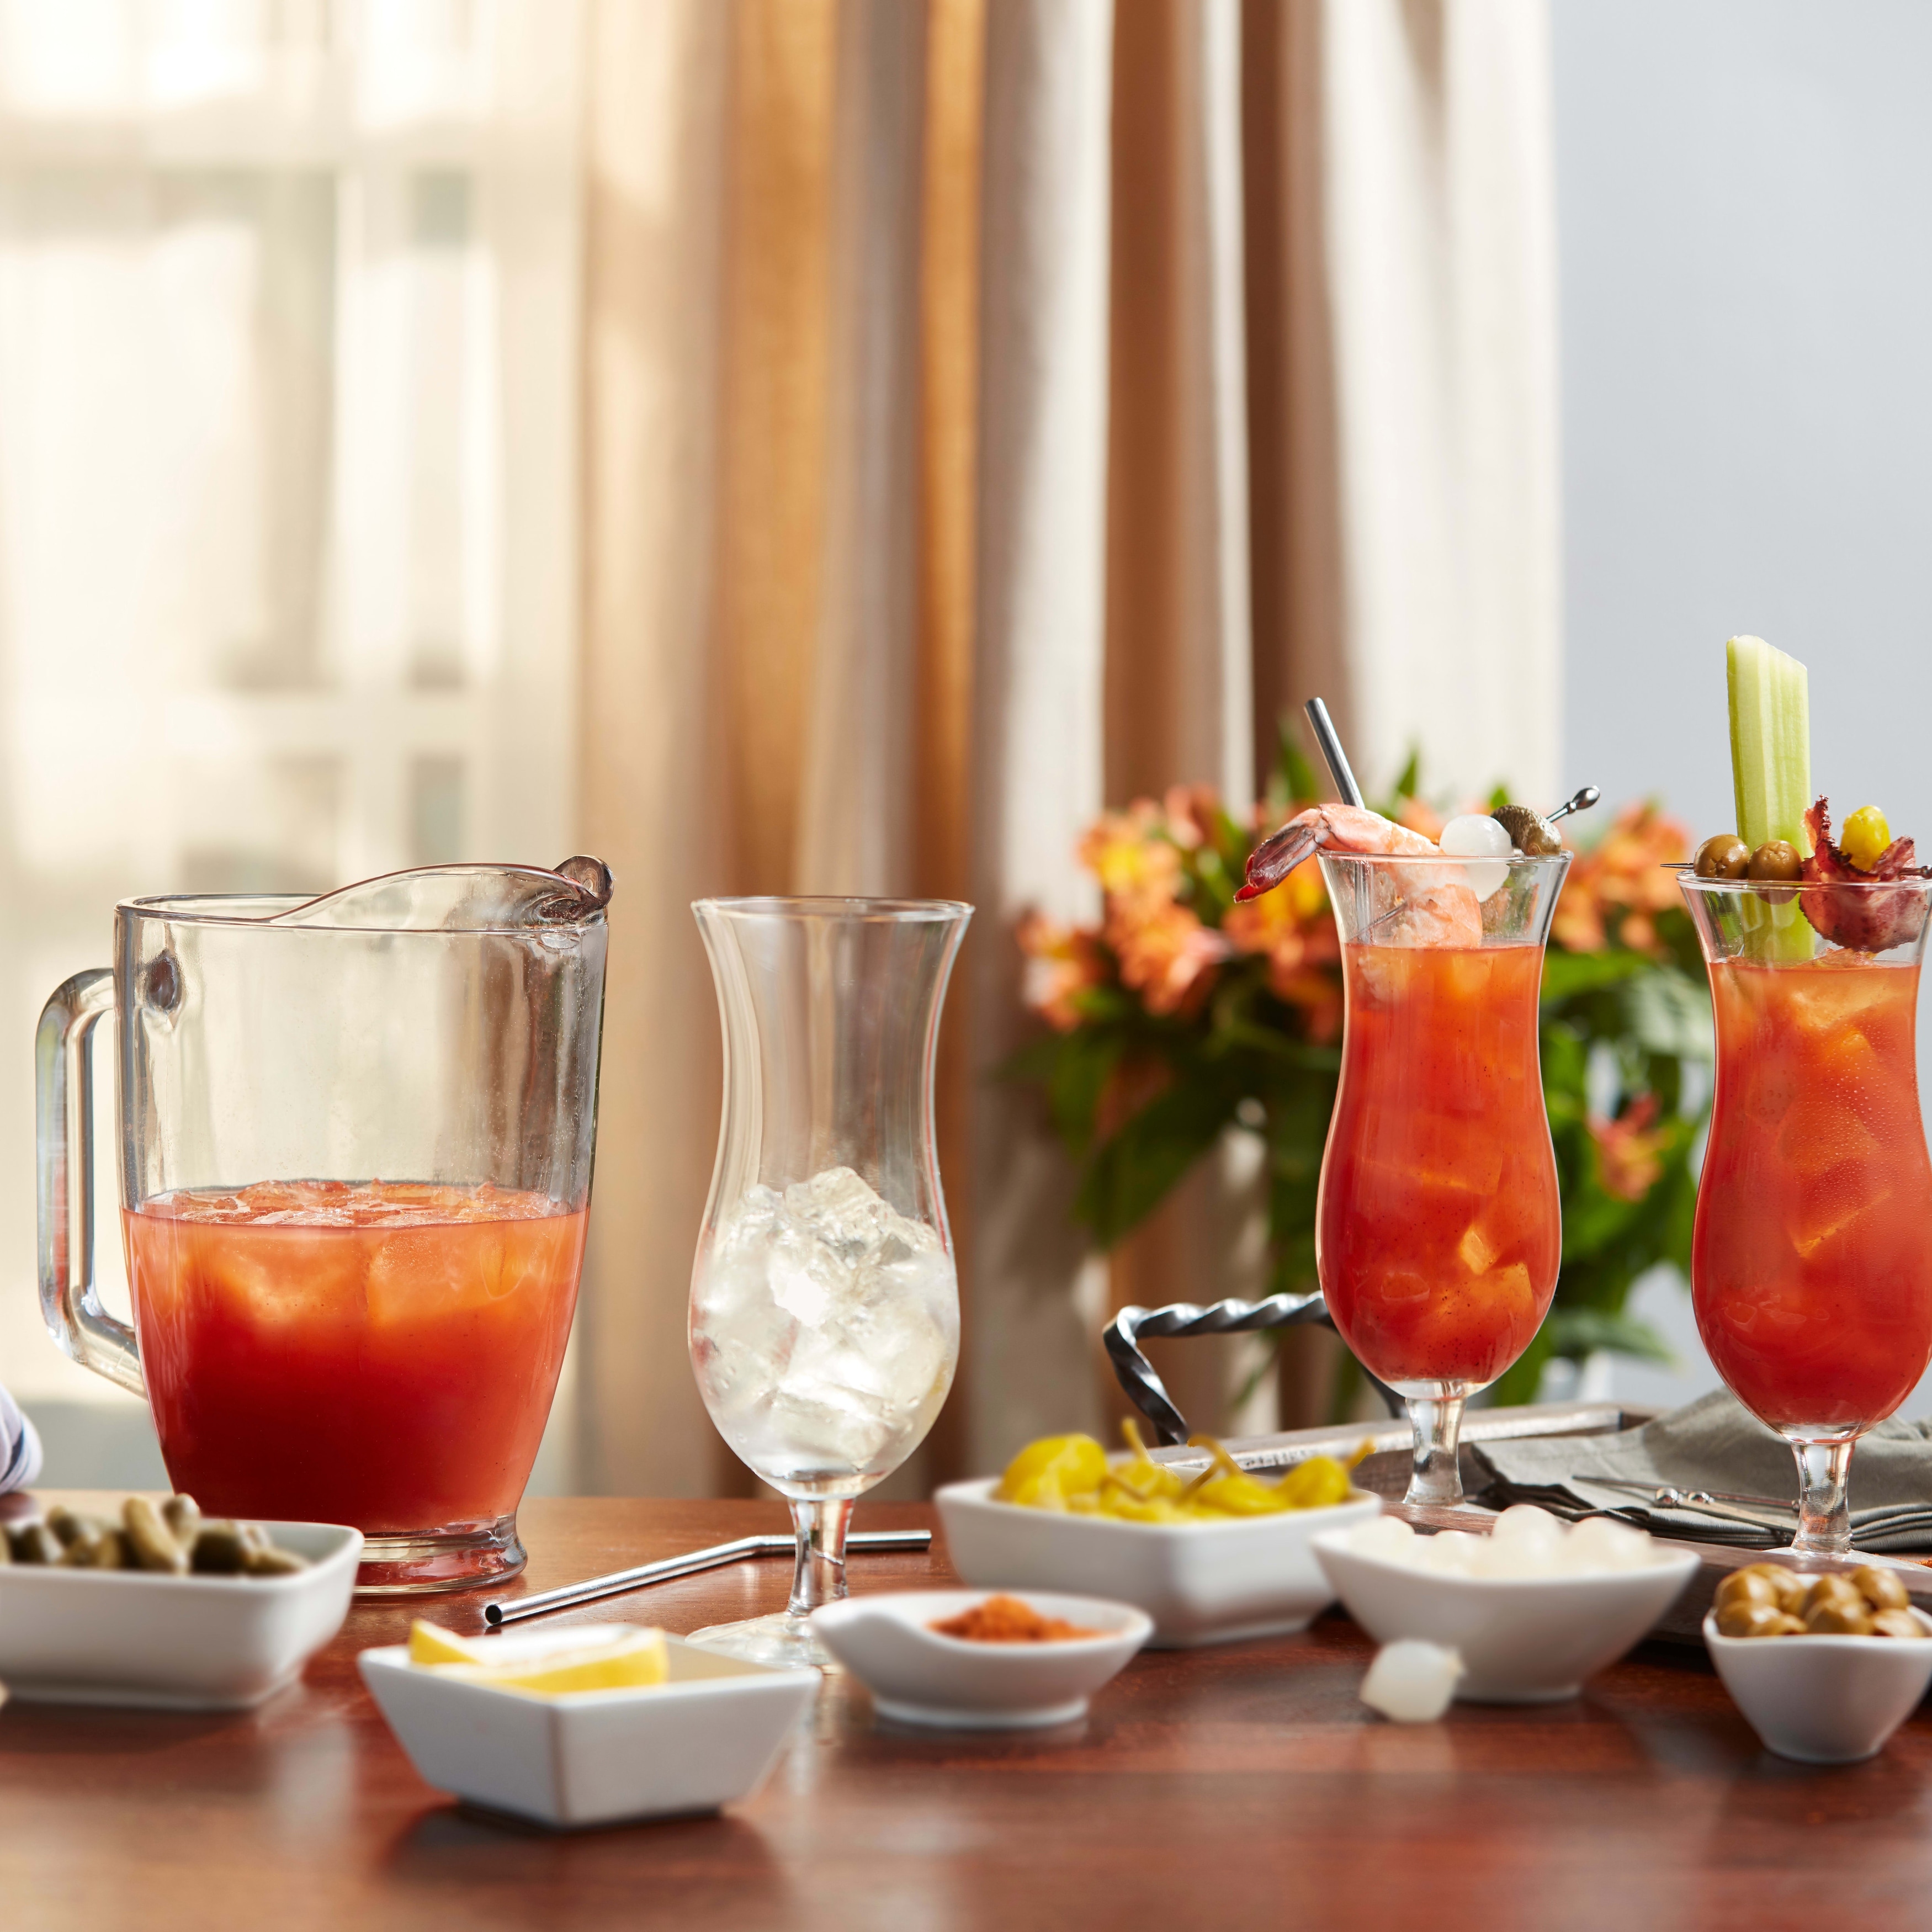 https://ak1.ostkcdn.com/images/products/is/images/direct/ebba8886424b8fd43c4de5b391c60d076bbbf927/Libbey-Modern-Bar-Bloody-Mary-Entertaining-Set-with-4-Hurricane-Glasses-and-Pitcher.jpg